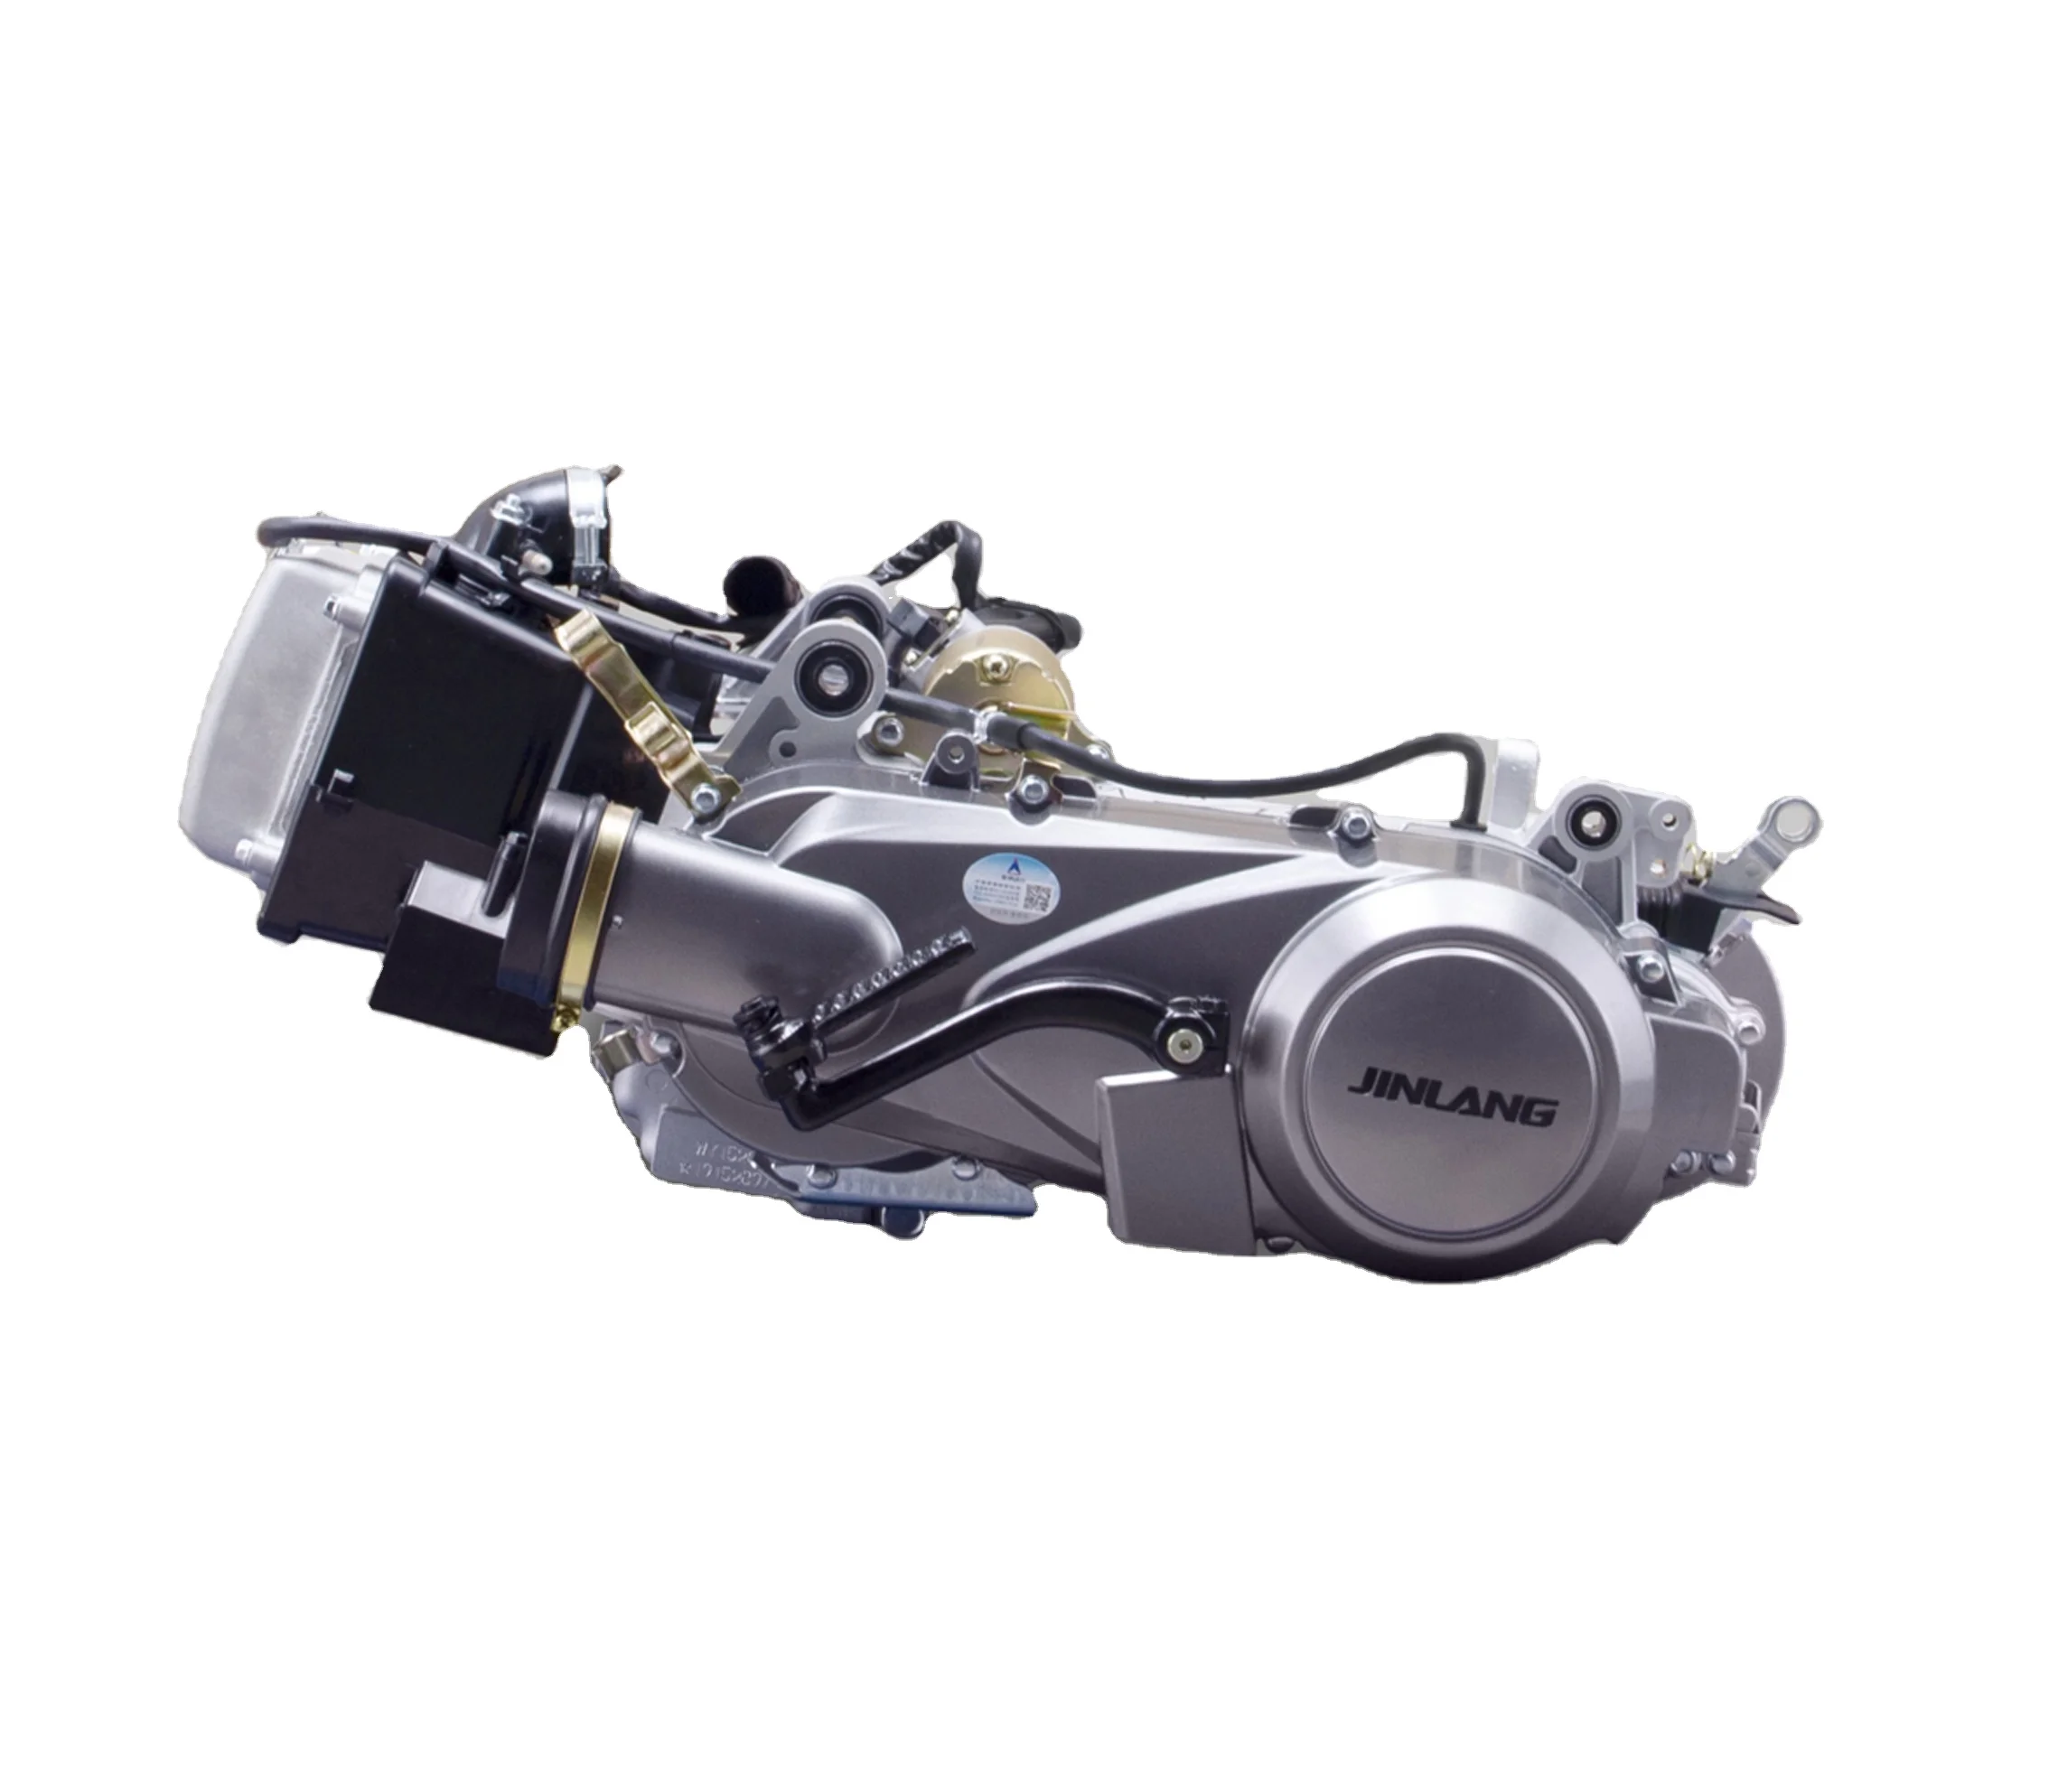 Jinlang 125cc Scooter Engine Buy Jinlang Engine,Gy6 125cc Engine,152qmi Engine Product on Alibaba.com